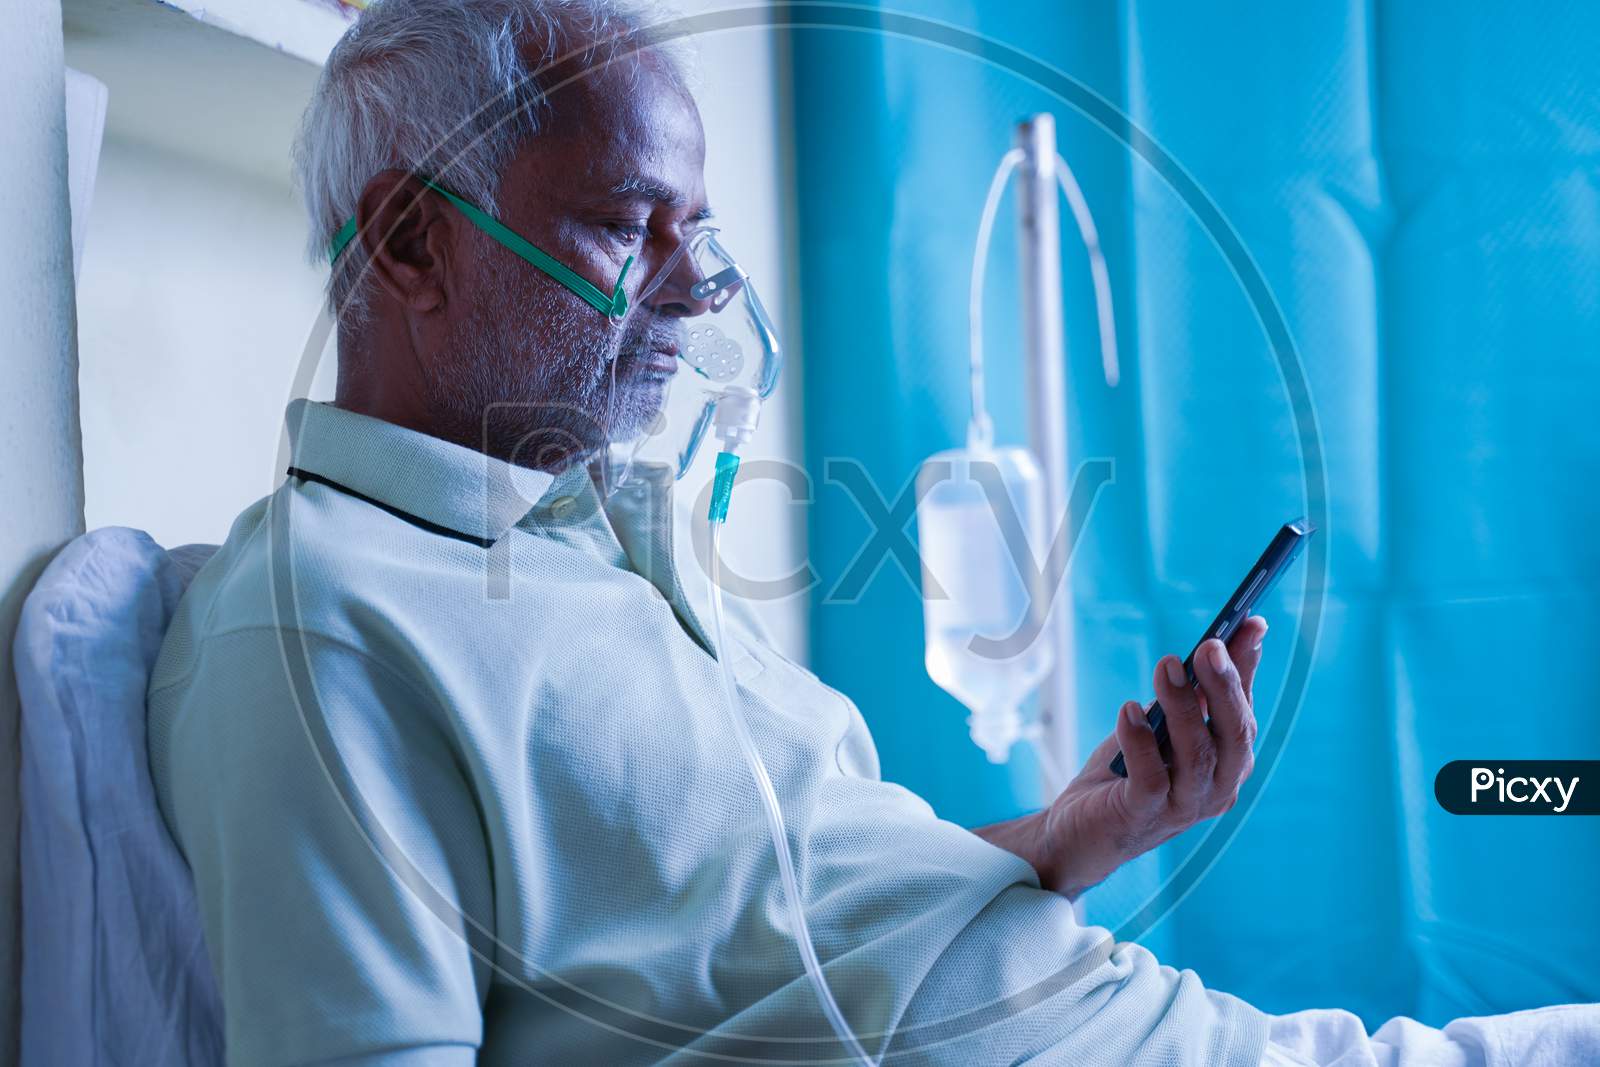 Sick Elderly Man With On Ventilator Oxygen Mask Checking Health Status Report On Mobile Phone - Concept Of Shortness On Breath Or Lung Infection Treatment For Covid-19 Coronavirus Infection